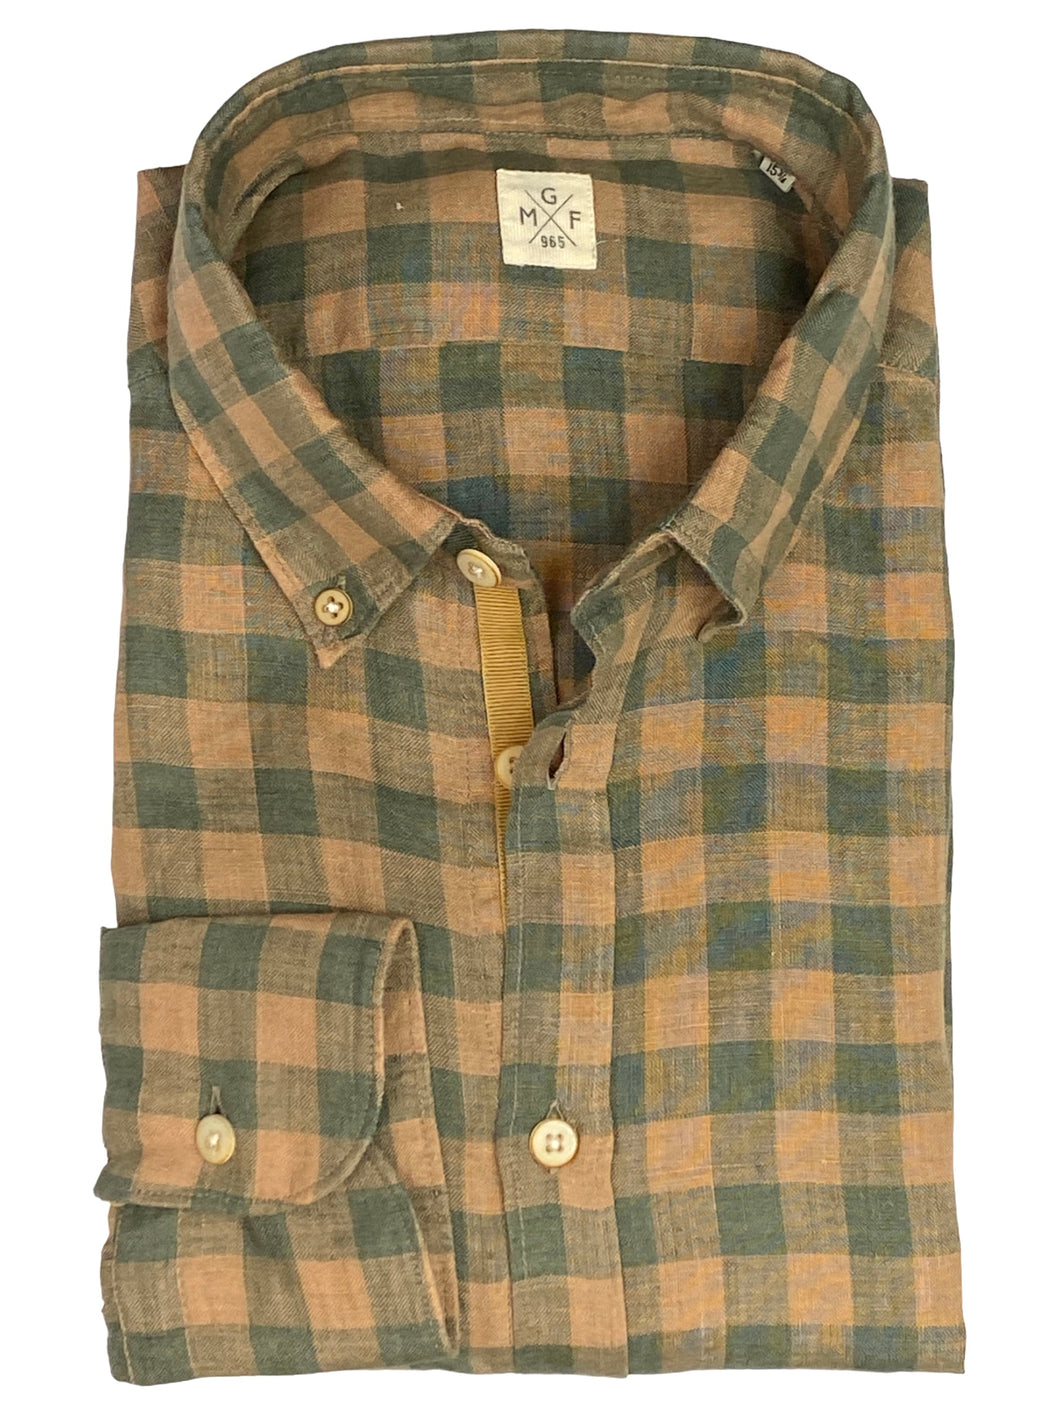 GMF 965 Linen Sport Shirt Camel and Olive Check